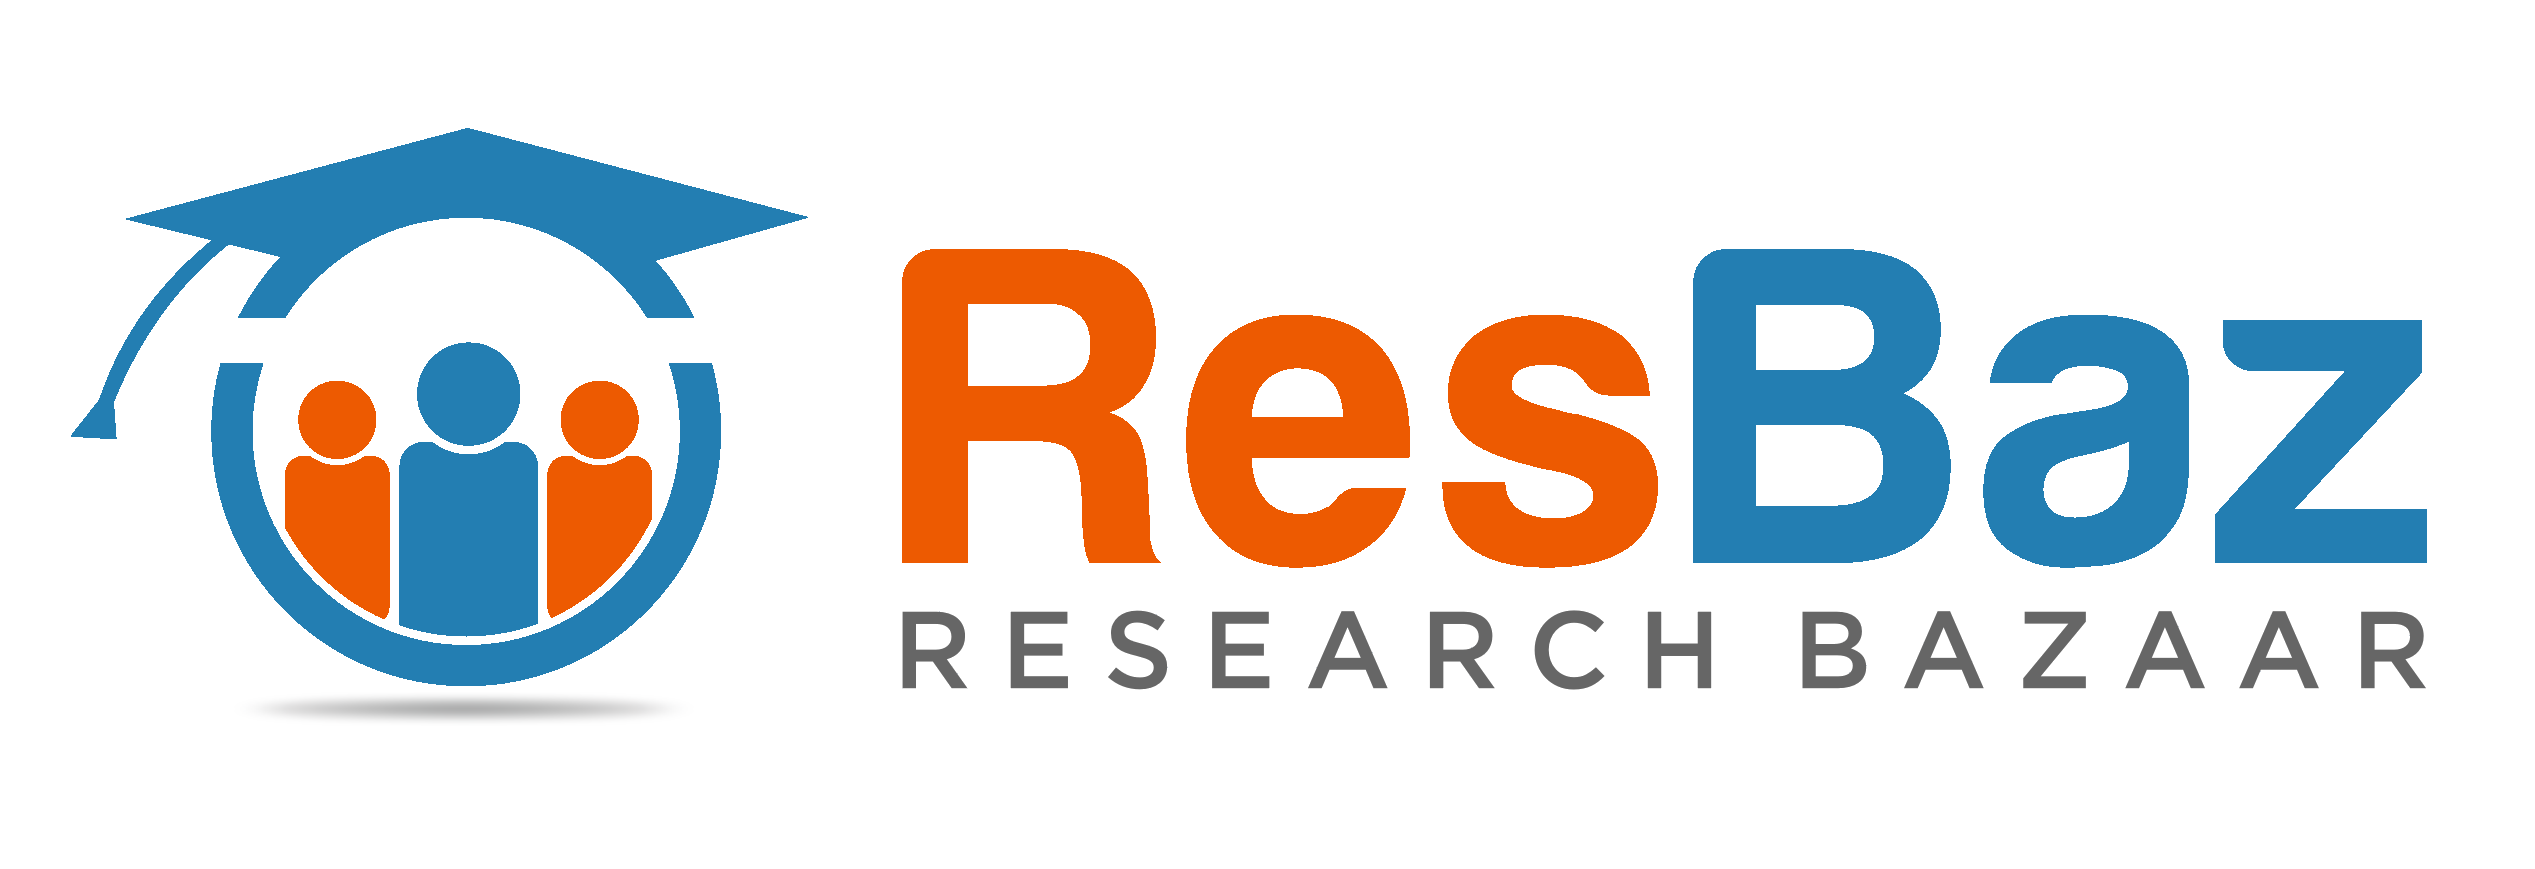 ITS Research Services